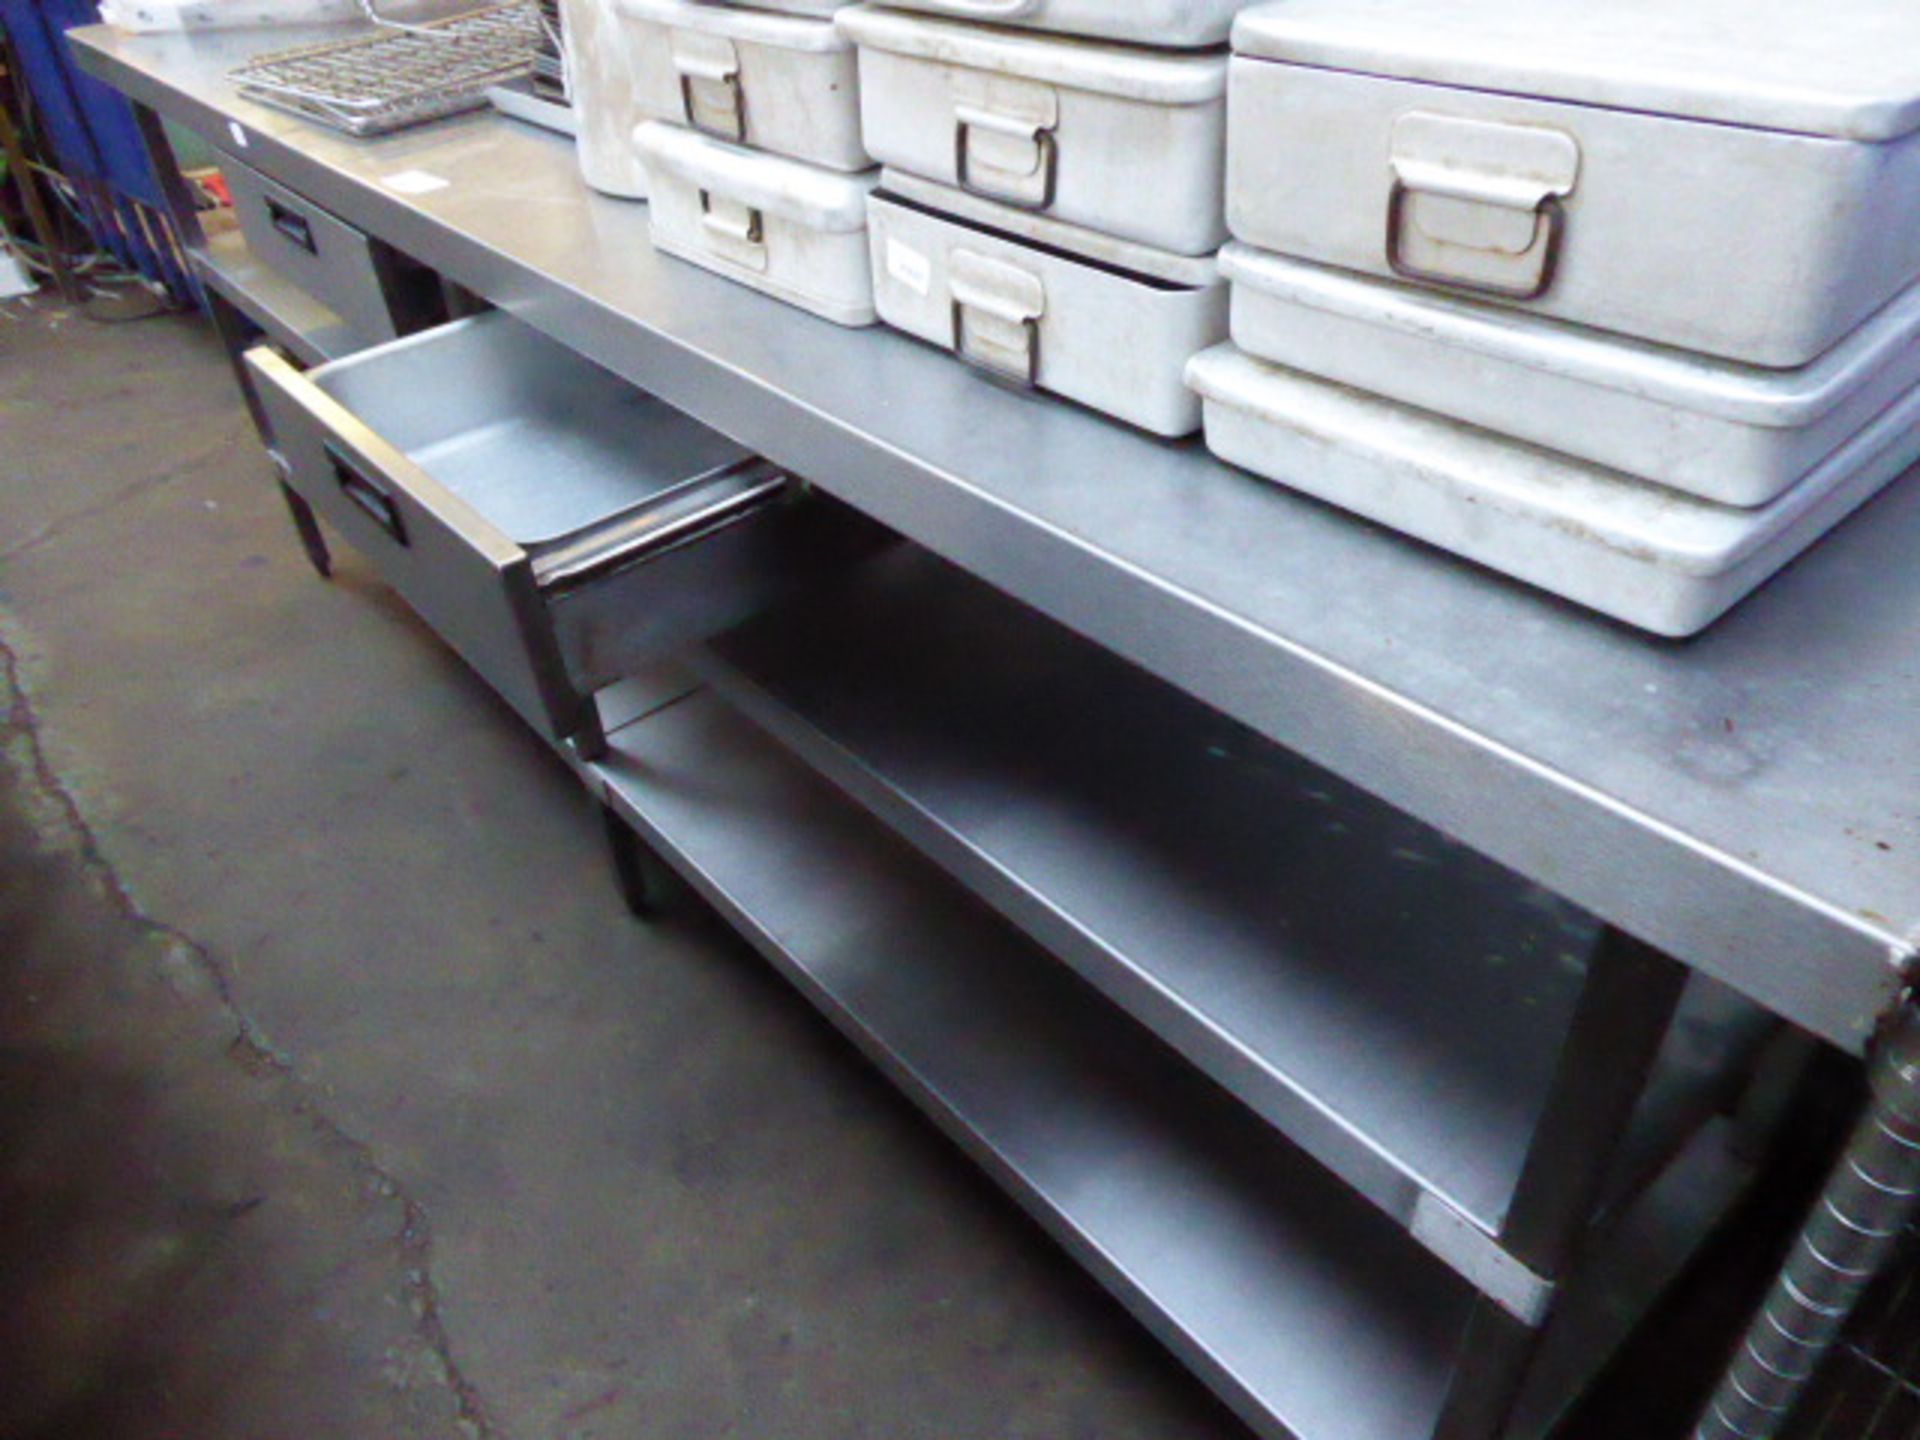 243cm stainless steel preparation table with 2 drawers and shelf under - Image 2 of 2